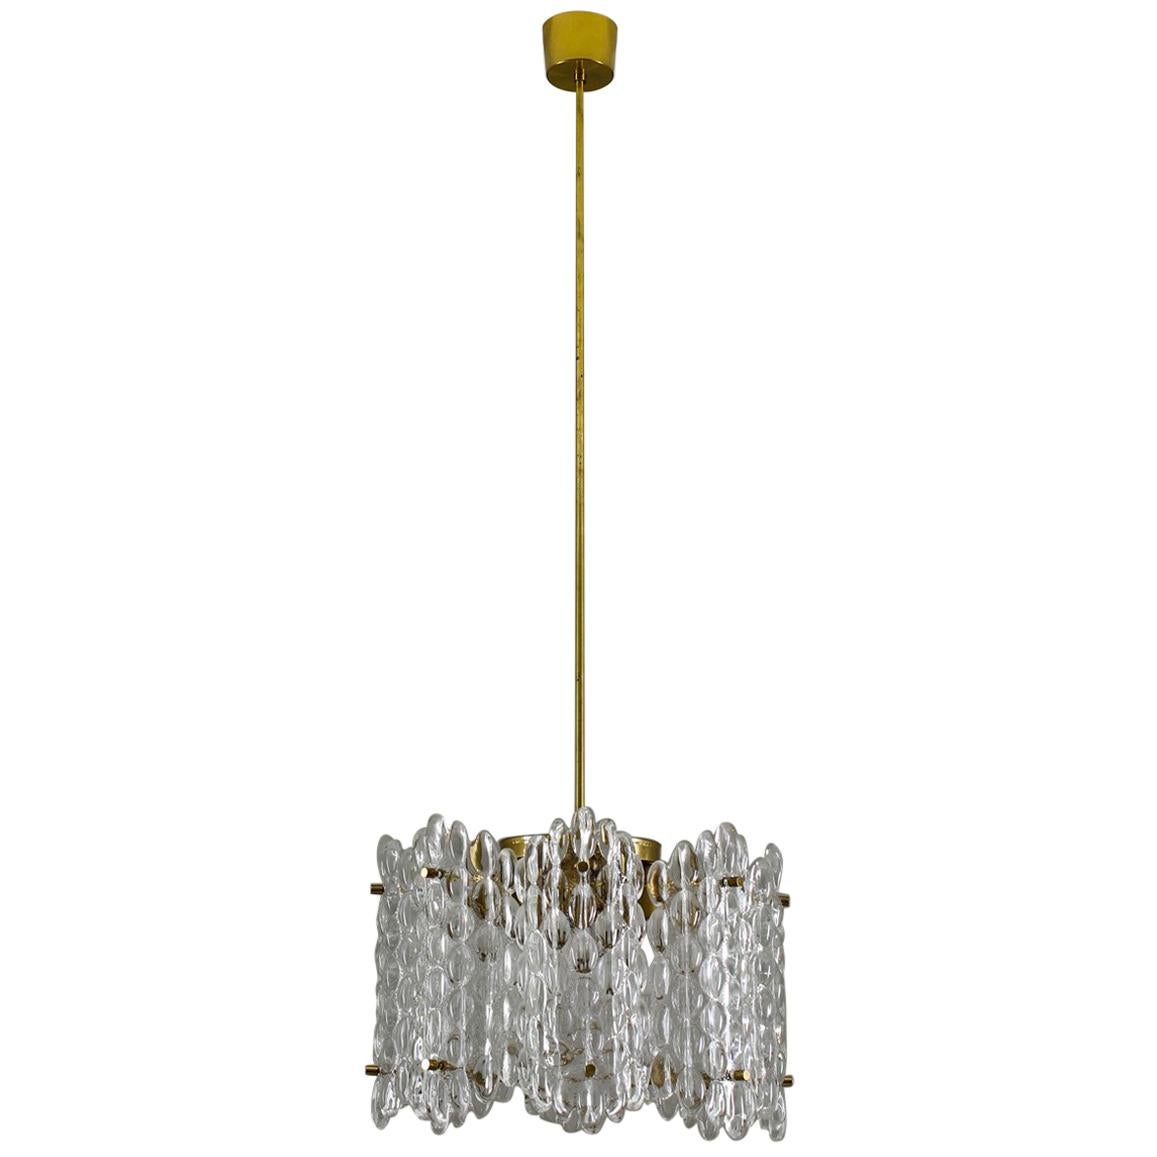 Pair of Swedish Midcentury Chandeliers by Carl Fagerlund for Orrefors